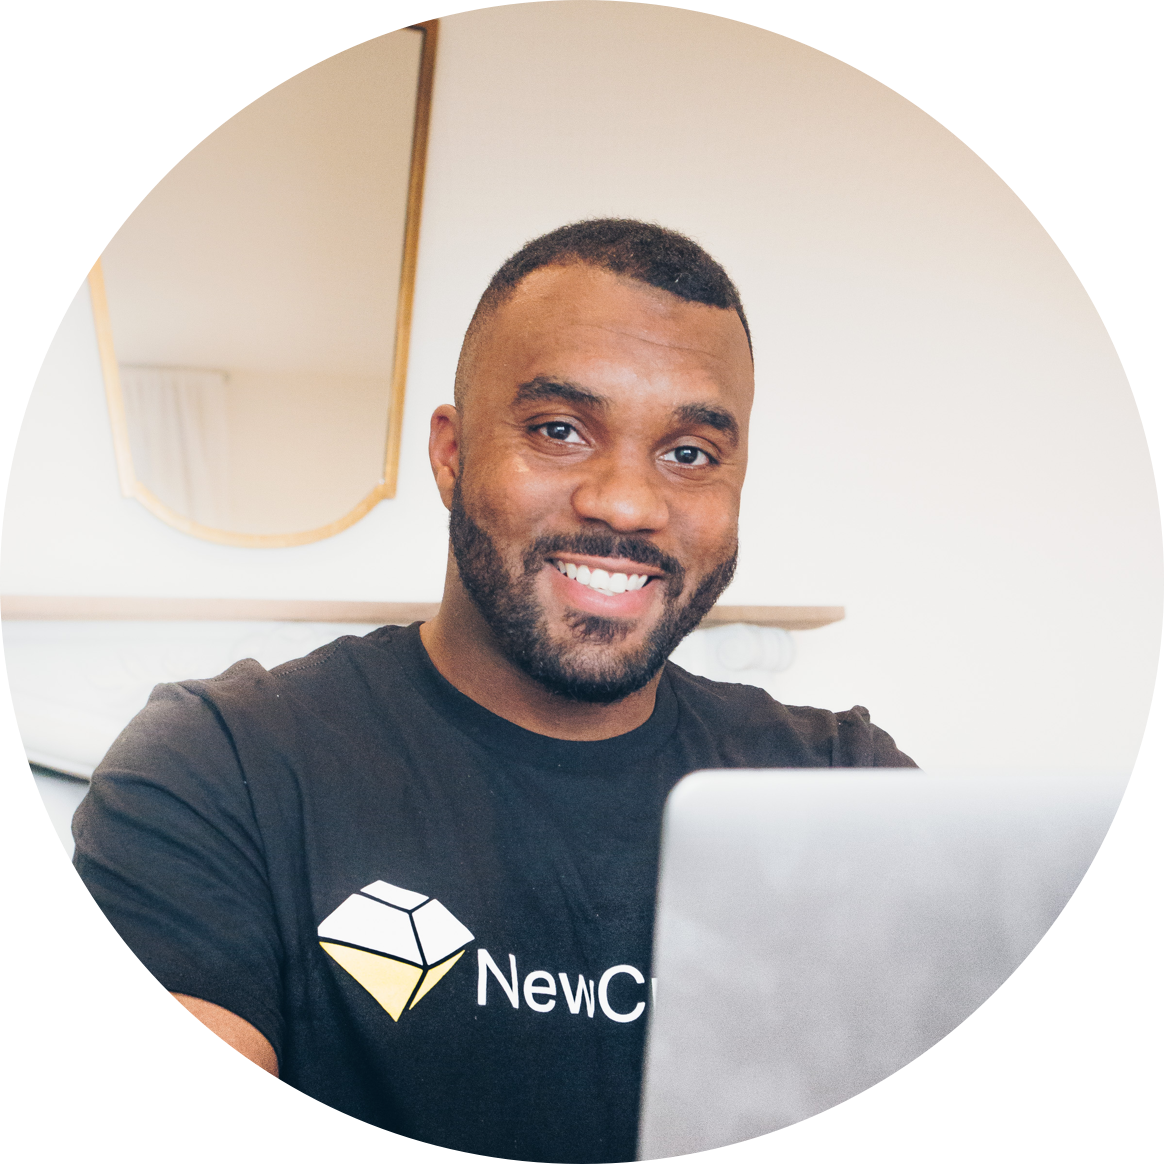 Meet the Founder Revolutionizing The Future of Work Through Y-Combinator-Backed Startup, NewCraft